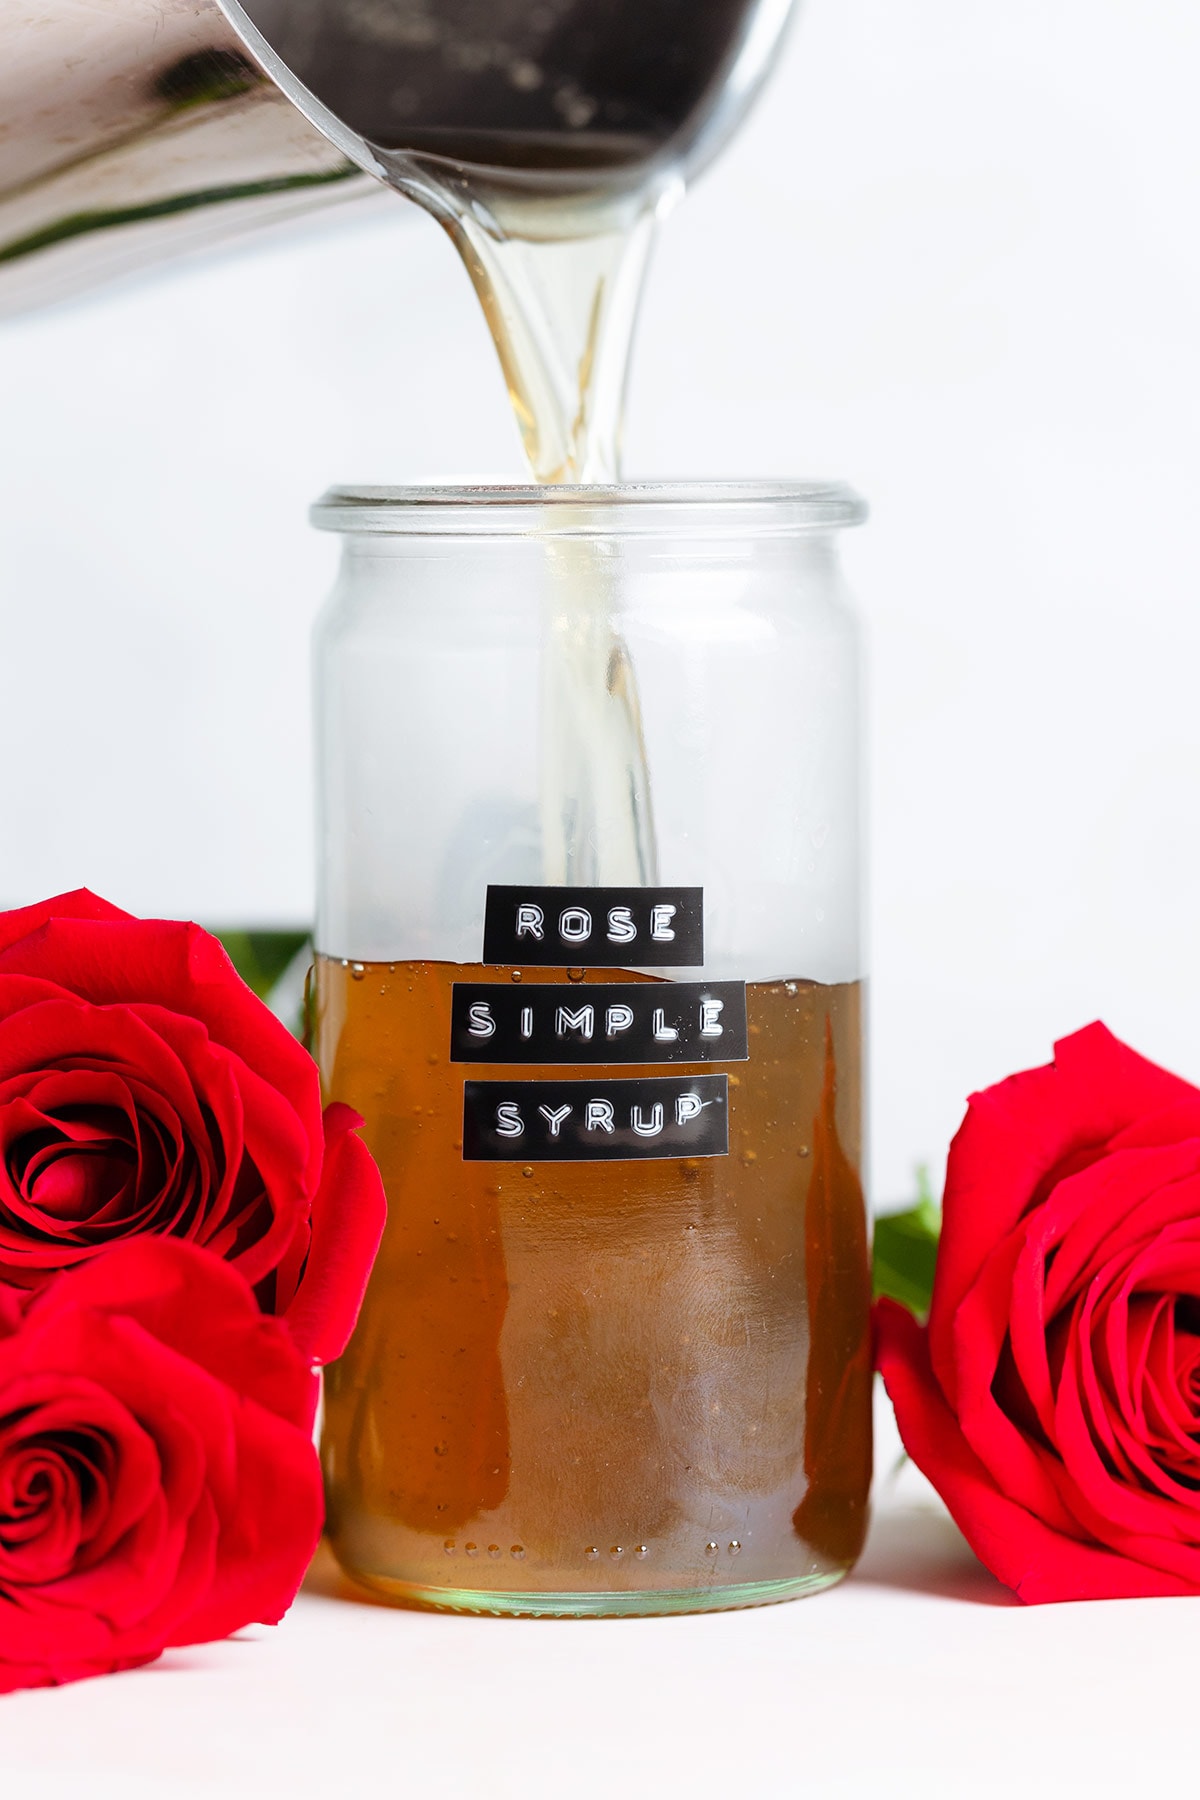 Syrup being poured into a glass jar that has a jar that says rose simple syrup on it with red roses around the jar.